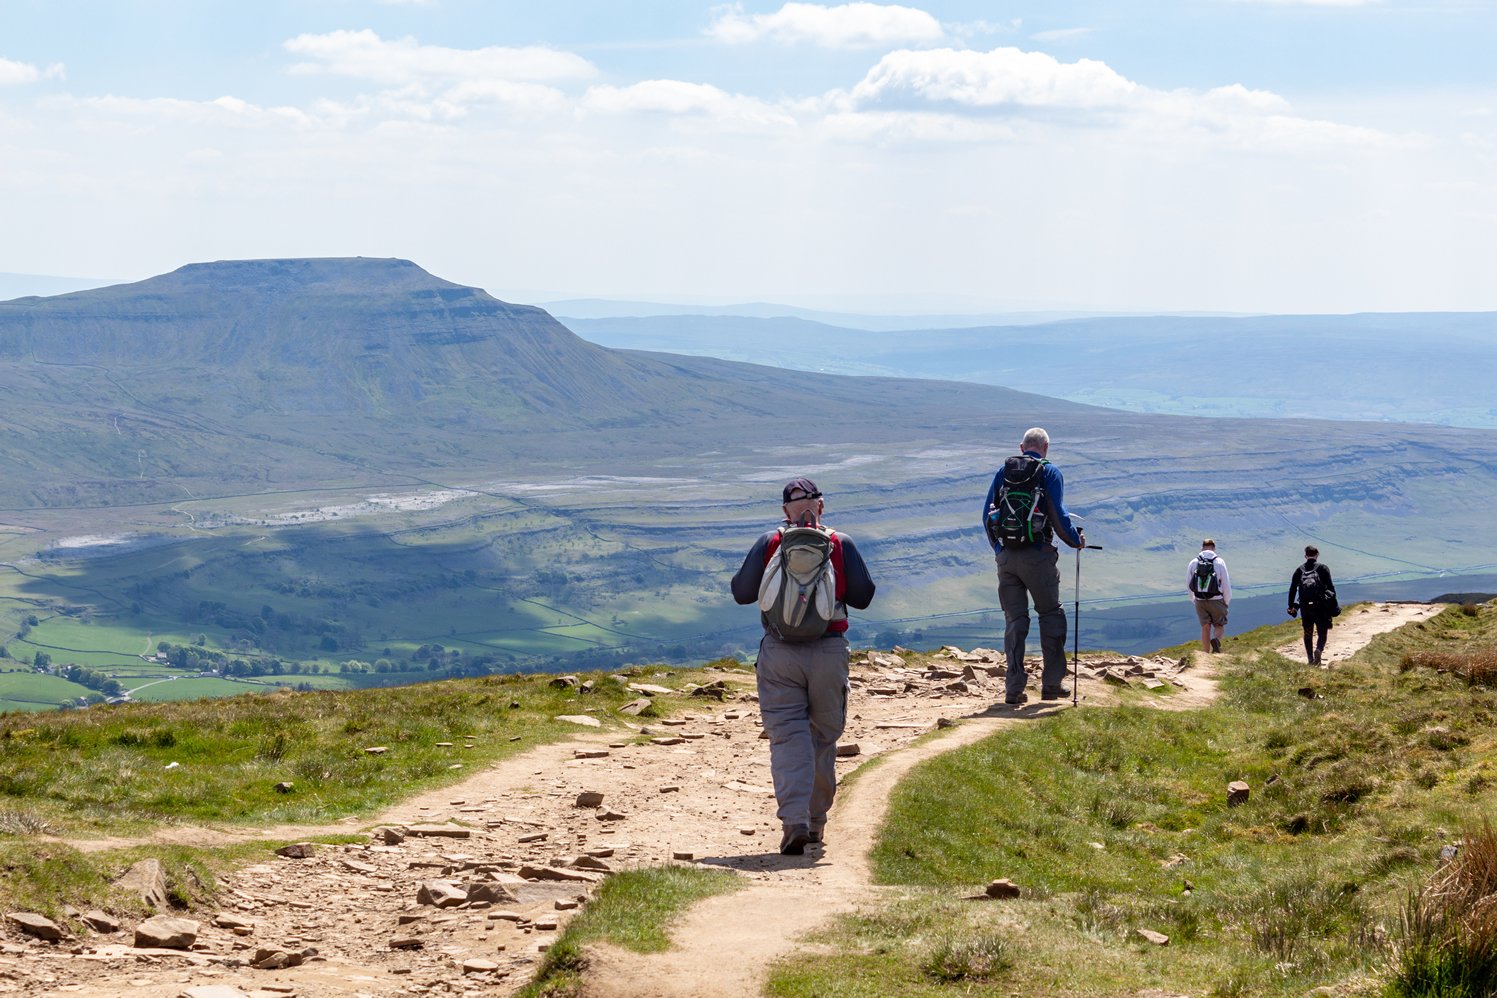 Image name walkers descending whernside view of ingleborough sunny yorkshire the 18 image from the post Stride Out in Yorkshire: Celebrate National Walking Day in Yorkshire.com.